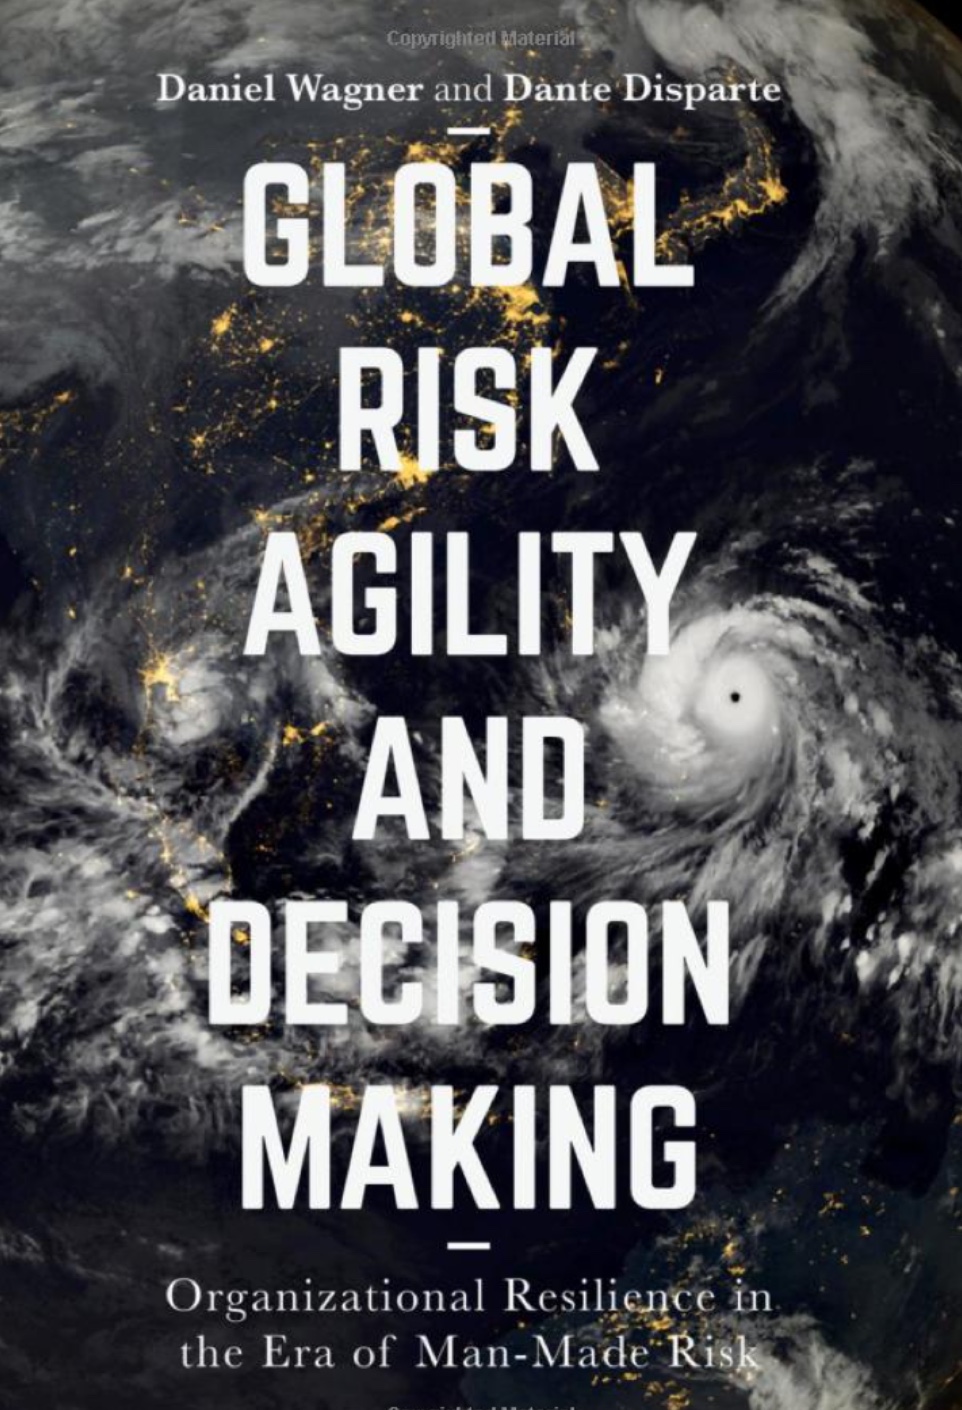 Global risk agility and decision making dante disparte